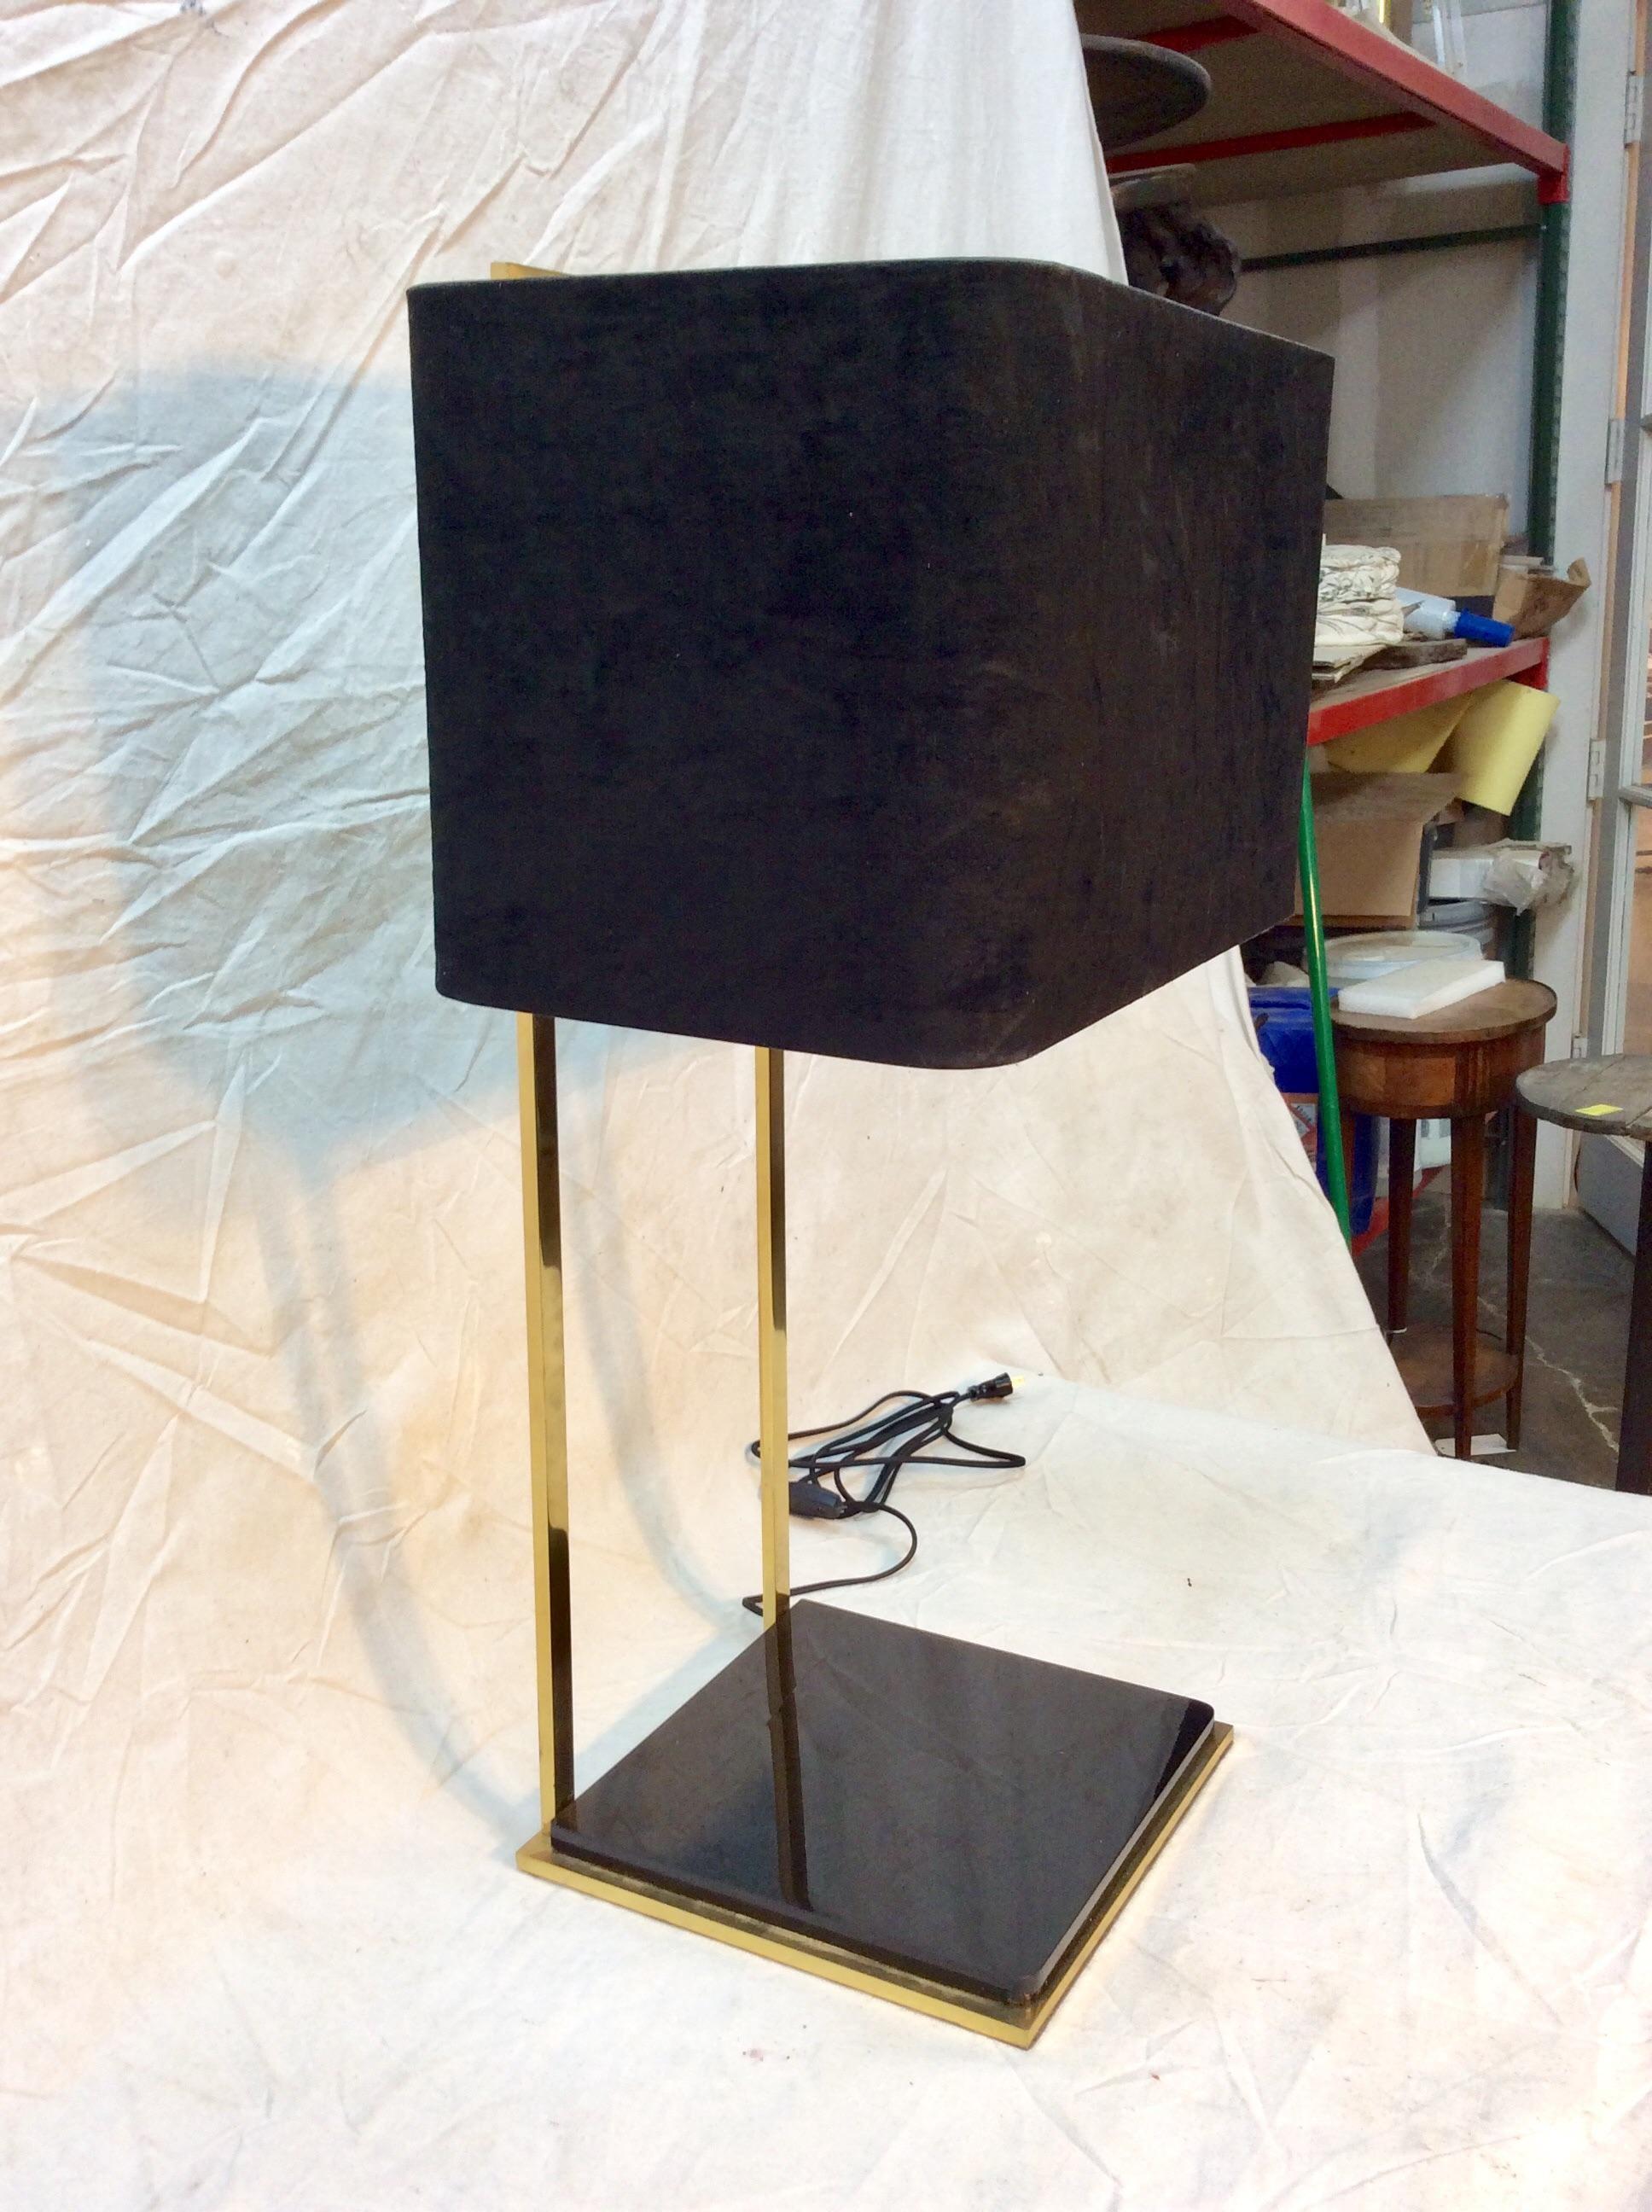 This Mid Century Modern Italian Brass Table Lamp features brass construction with a black acrylic base. The black shade with its gold interior is secured to the lamp socket in the style of an Uno Fitter. Designed in a clean-lined fashion, this piece